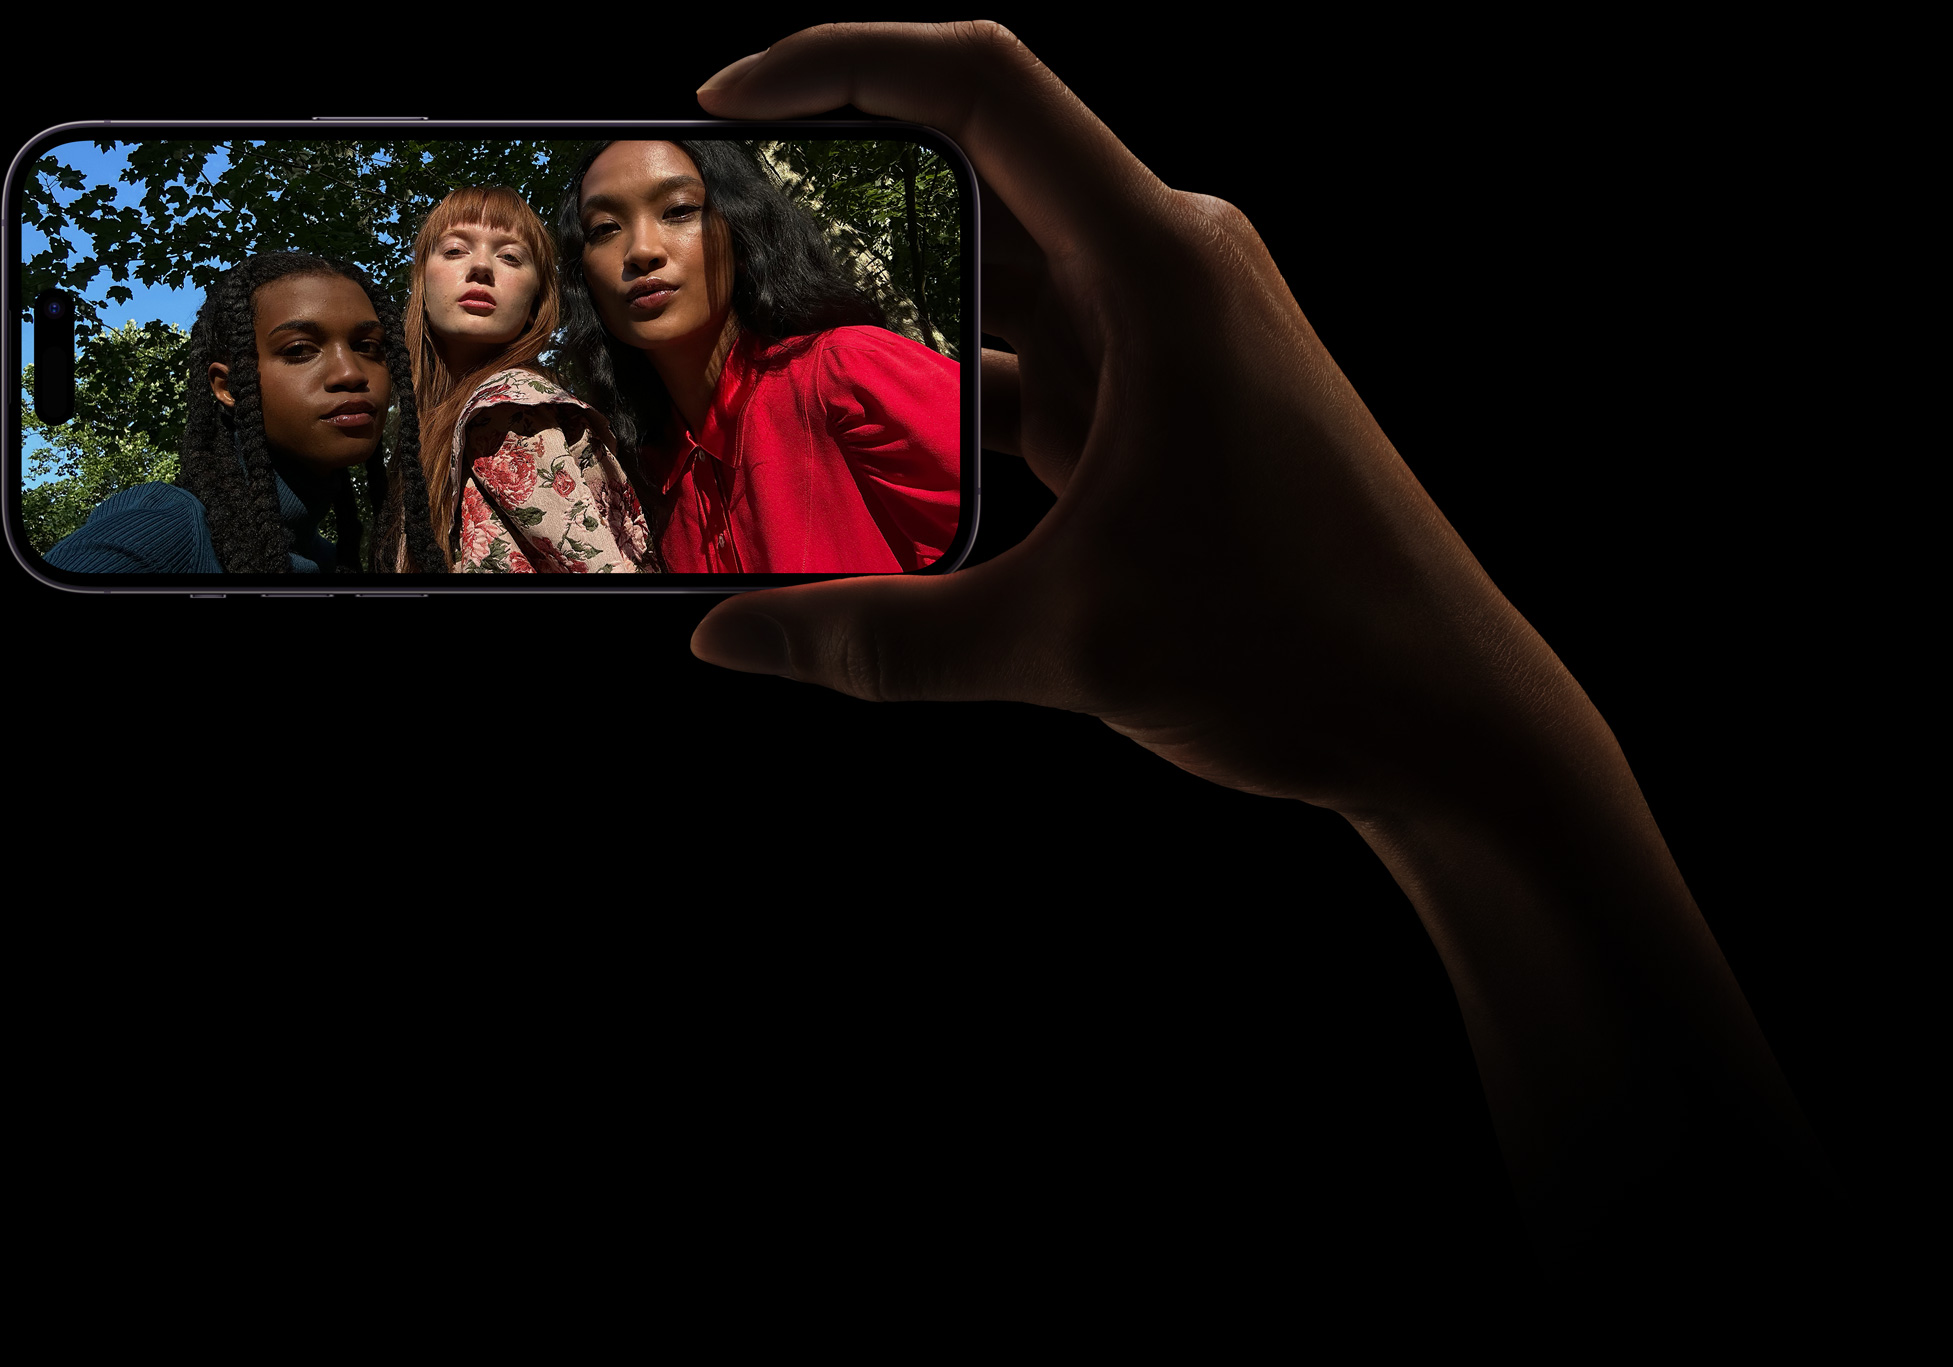 A group selfie of three women posing together. The photo was taken on the TrueDepth camera.